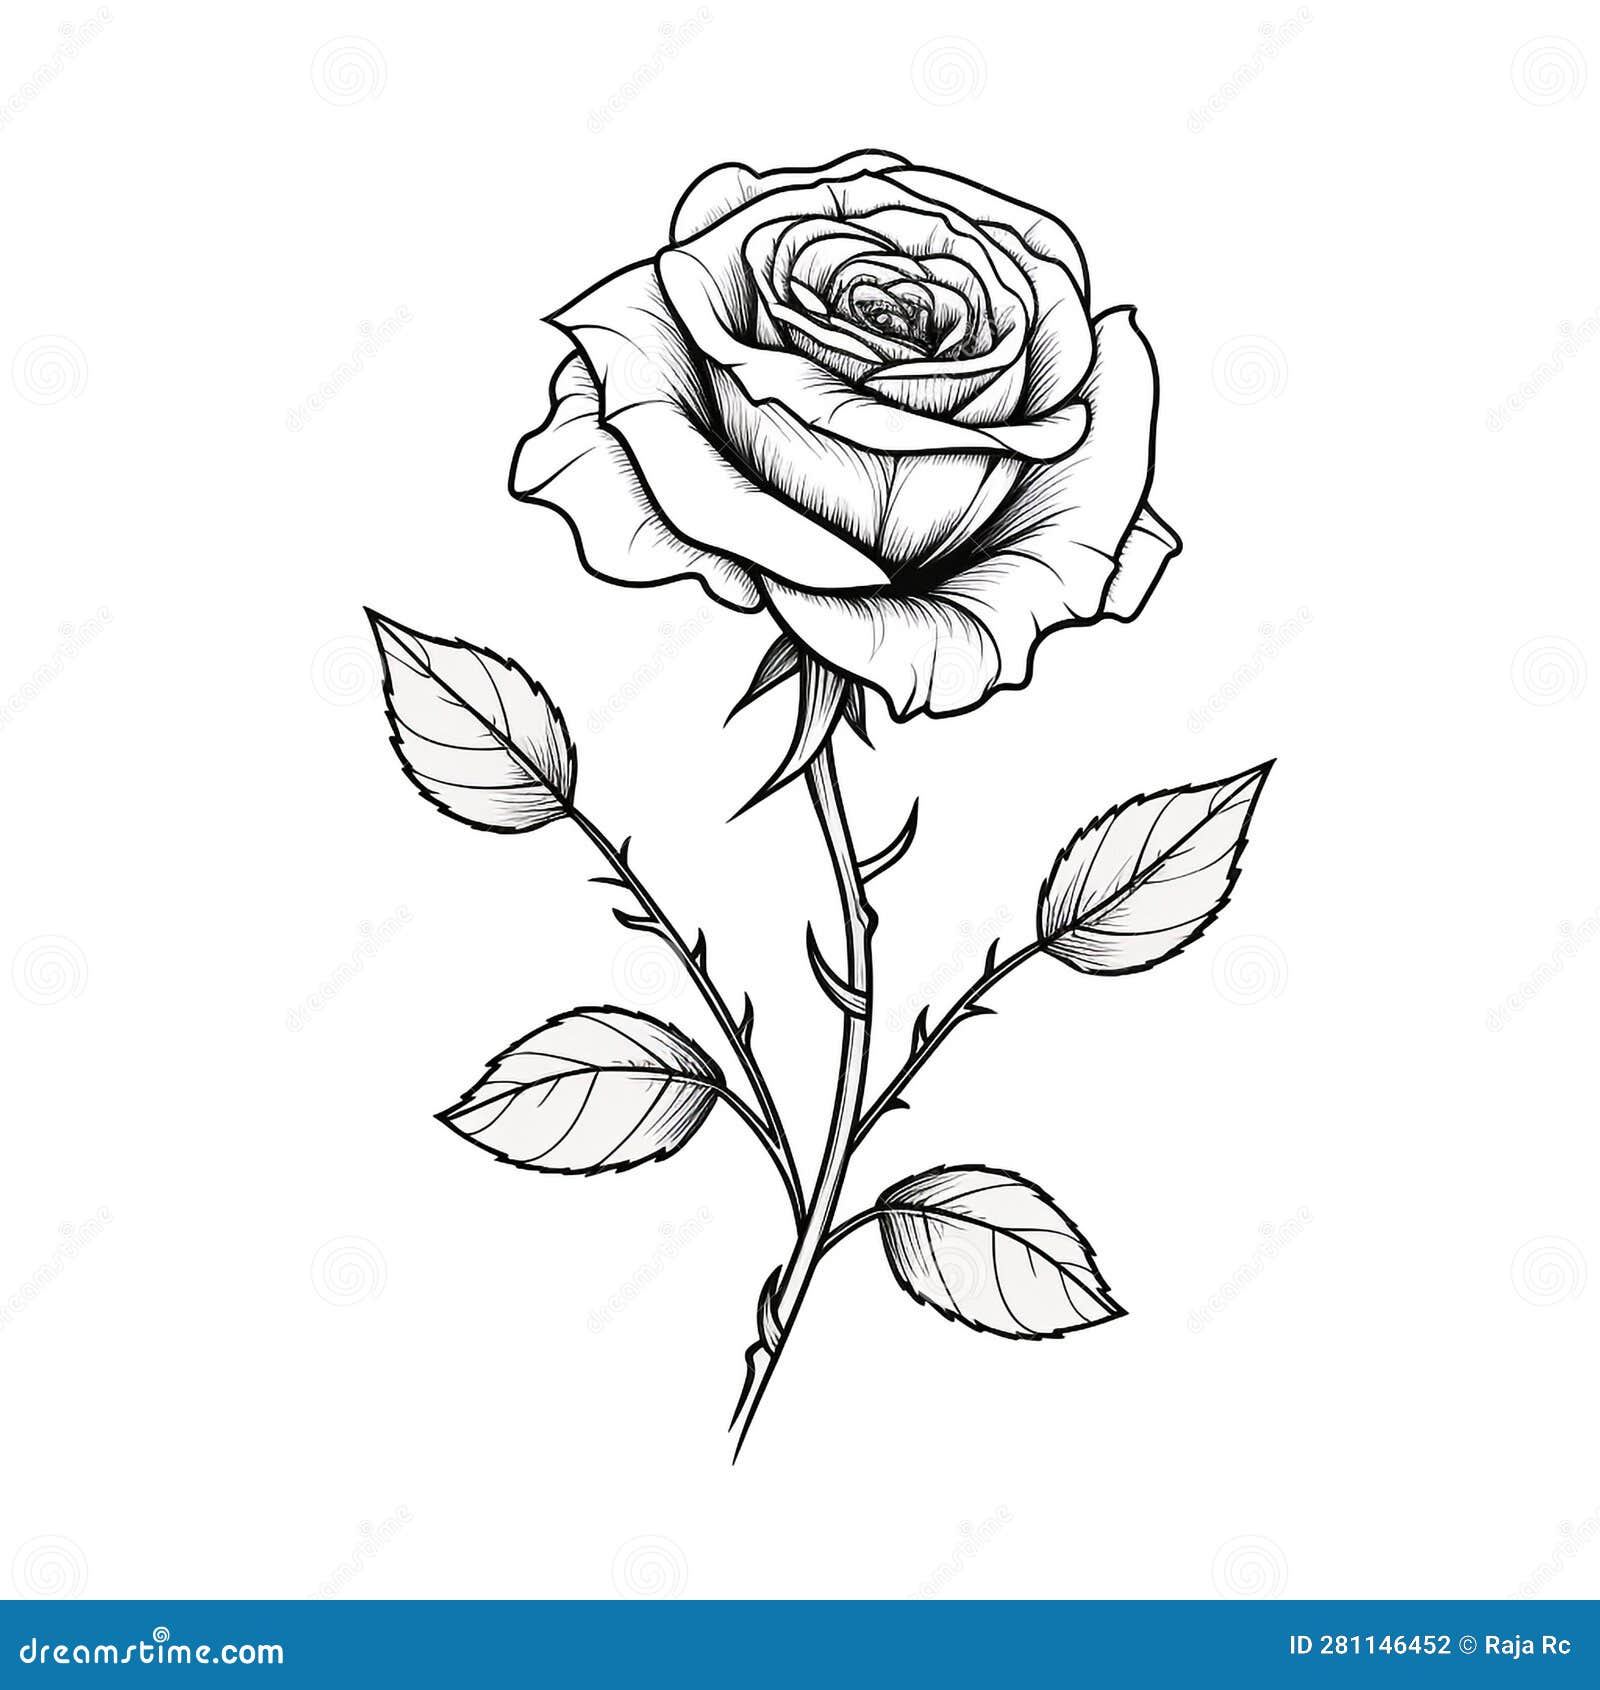 Rose flower drawing Royalty Free Vector Image - VectorStock